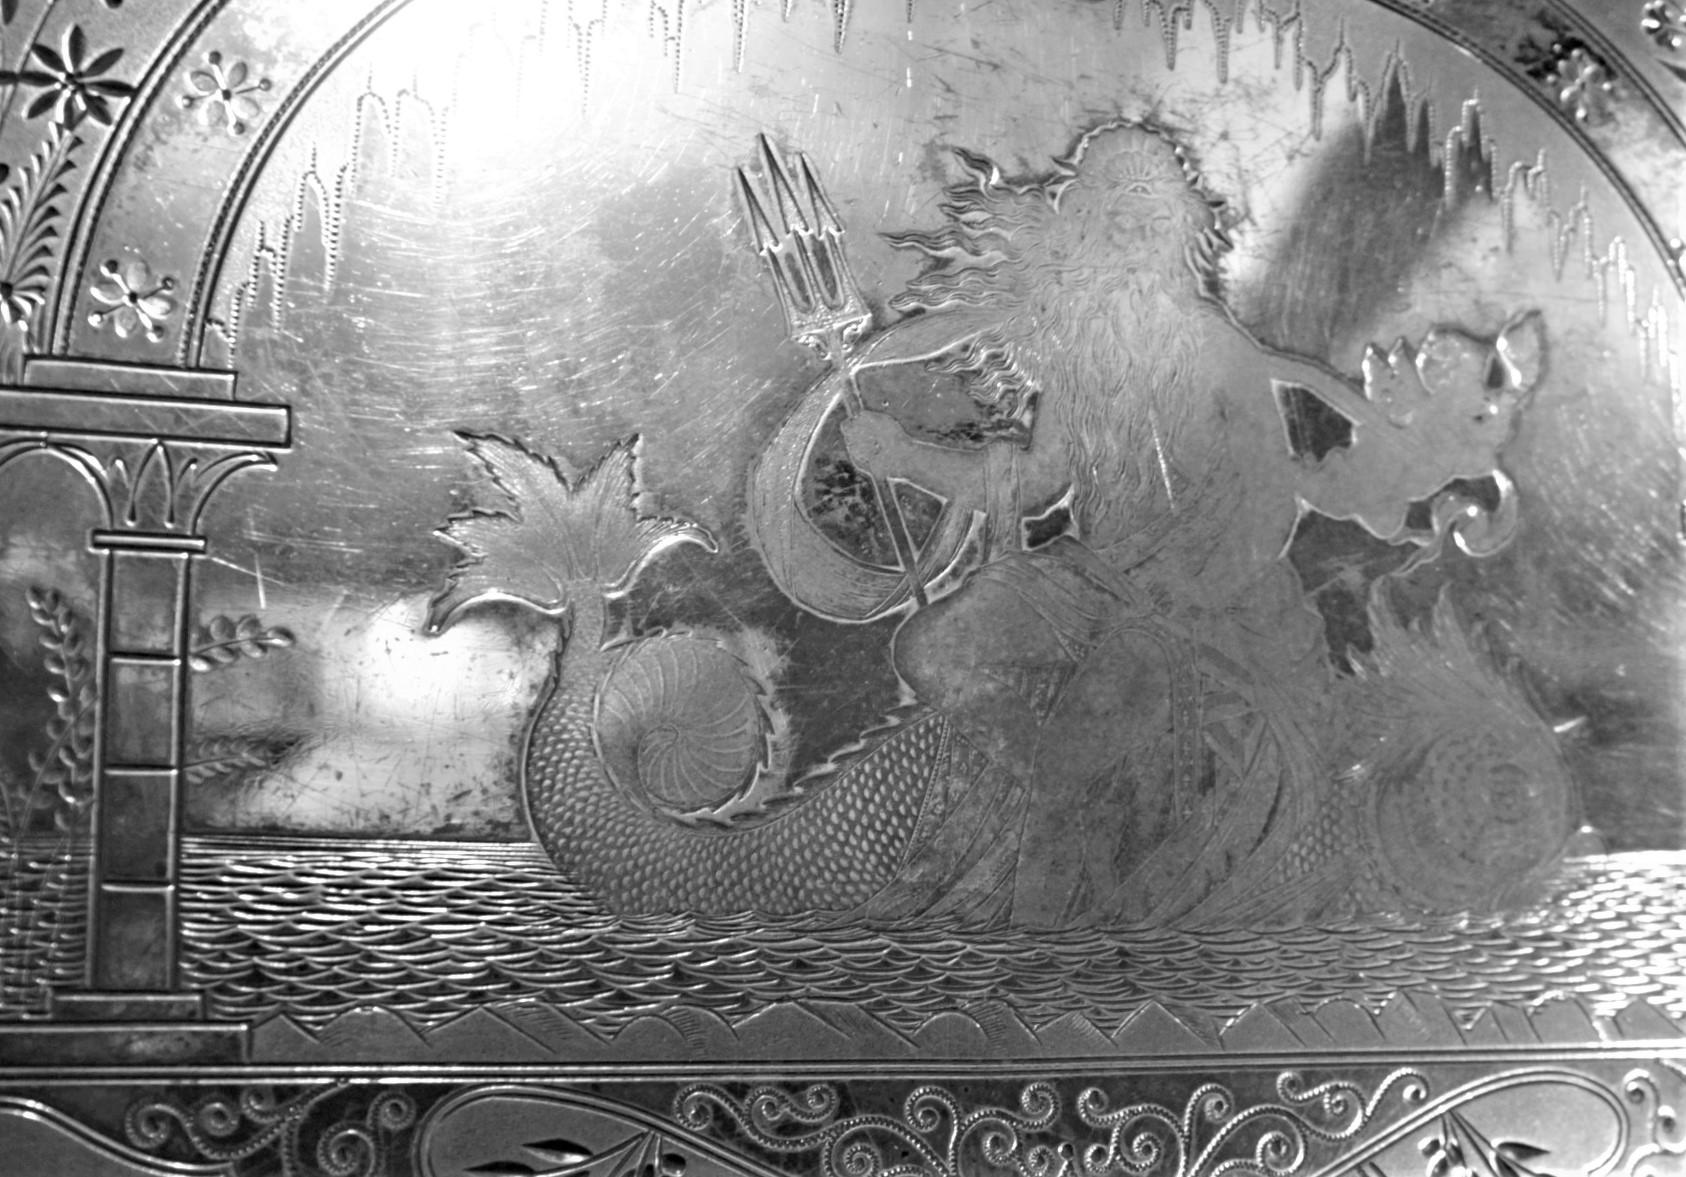 Large Aesthetic Movement Silver Plated Serving Tray with Warriors and Serpents In Good Condition For Sale In Hamilton, Ontario